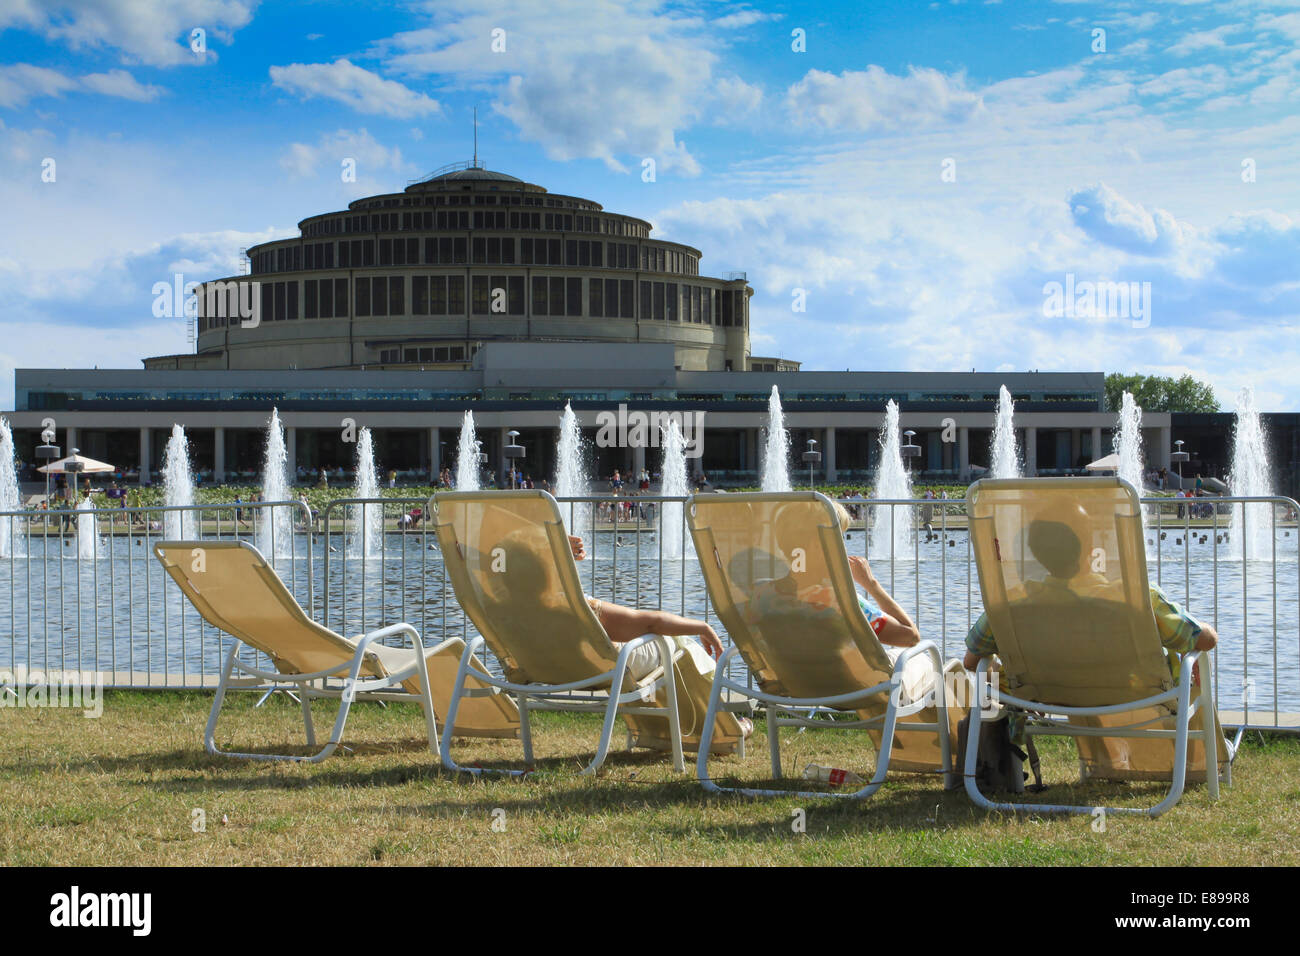 People on deckchairs at the Centennial Hall (designed by Max Berg, built in 1911–1913, listed on UNESCO Site in 2006) in Wroclaw Stock Photo